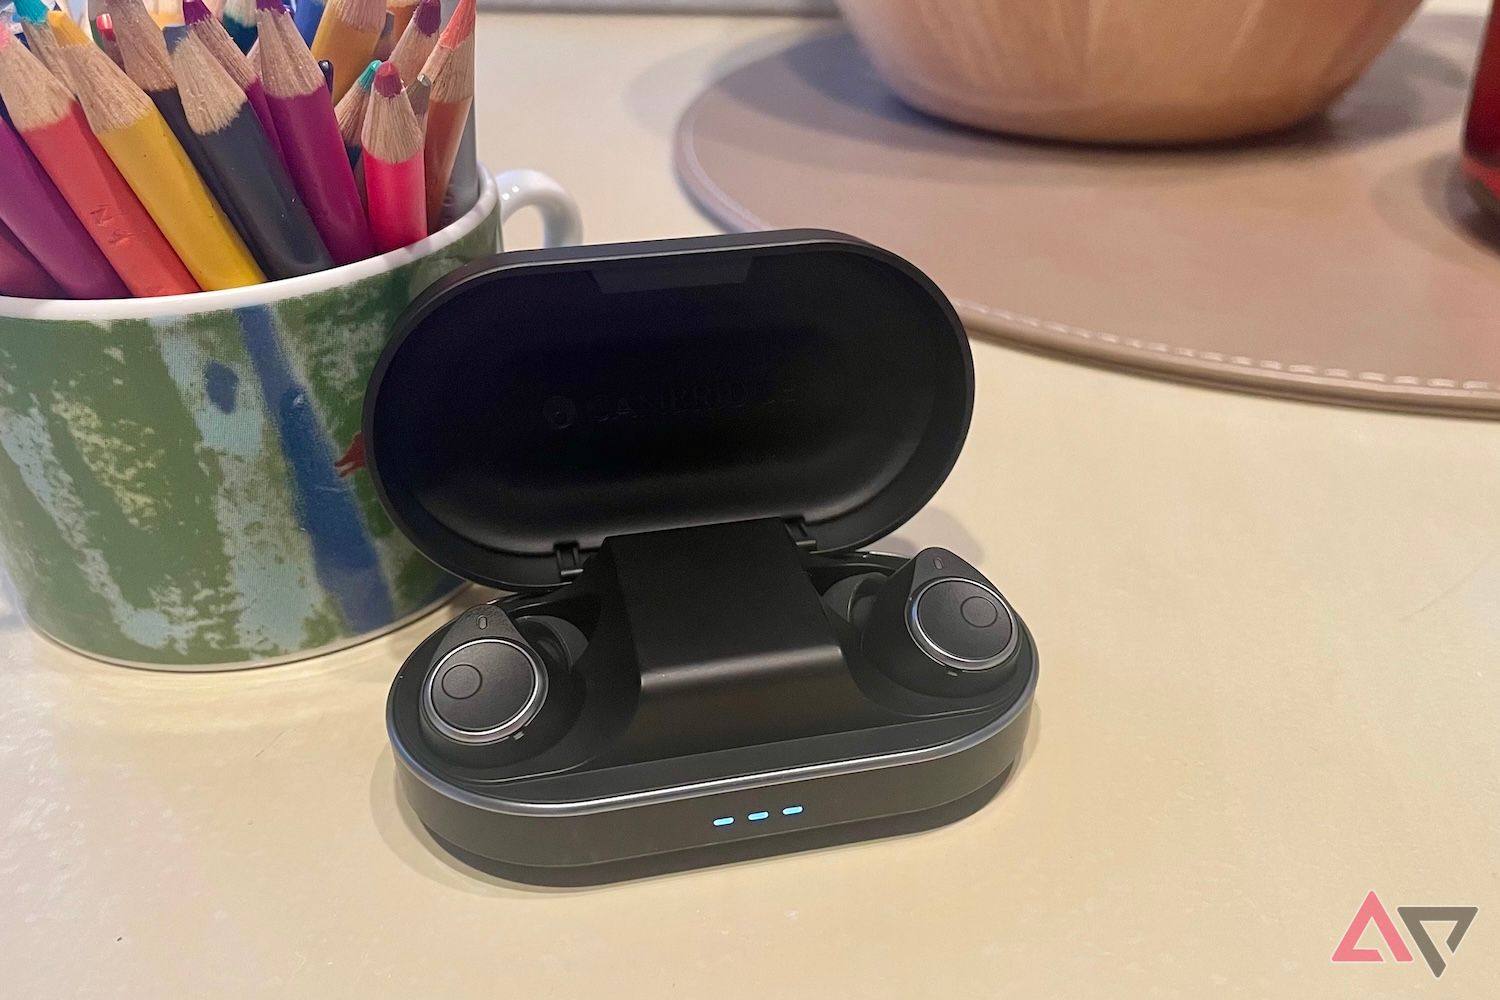 The Cambridge Audio Melomania M100 earbuds inside the opened charging case.